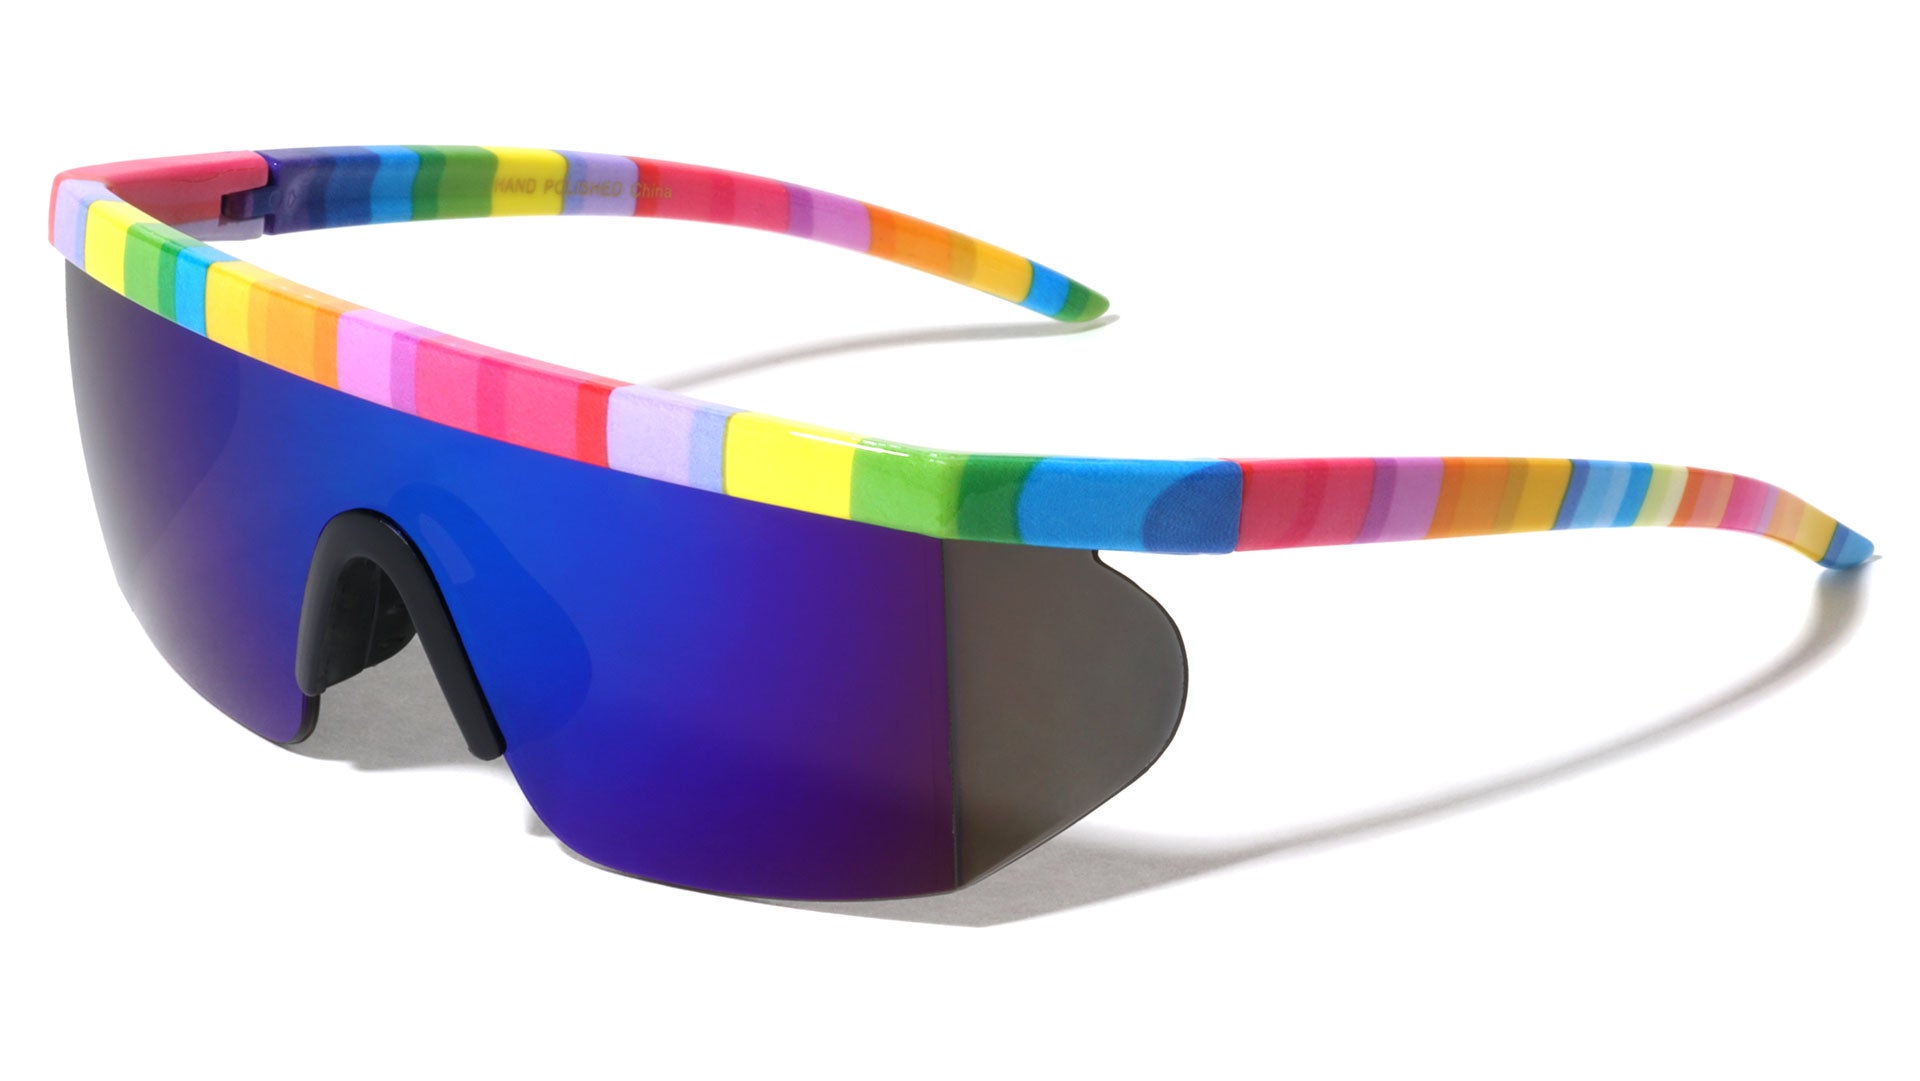 Ray Ban Aviators in all the colors of the rainbow! #rayban #aviator #mirror  #summerisaroundthecorner | Ray ban aviators, Rainbow colors, Ray bans